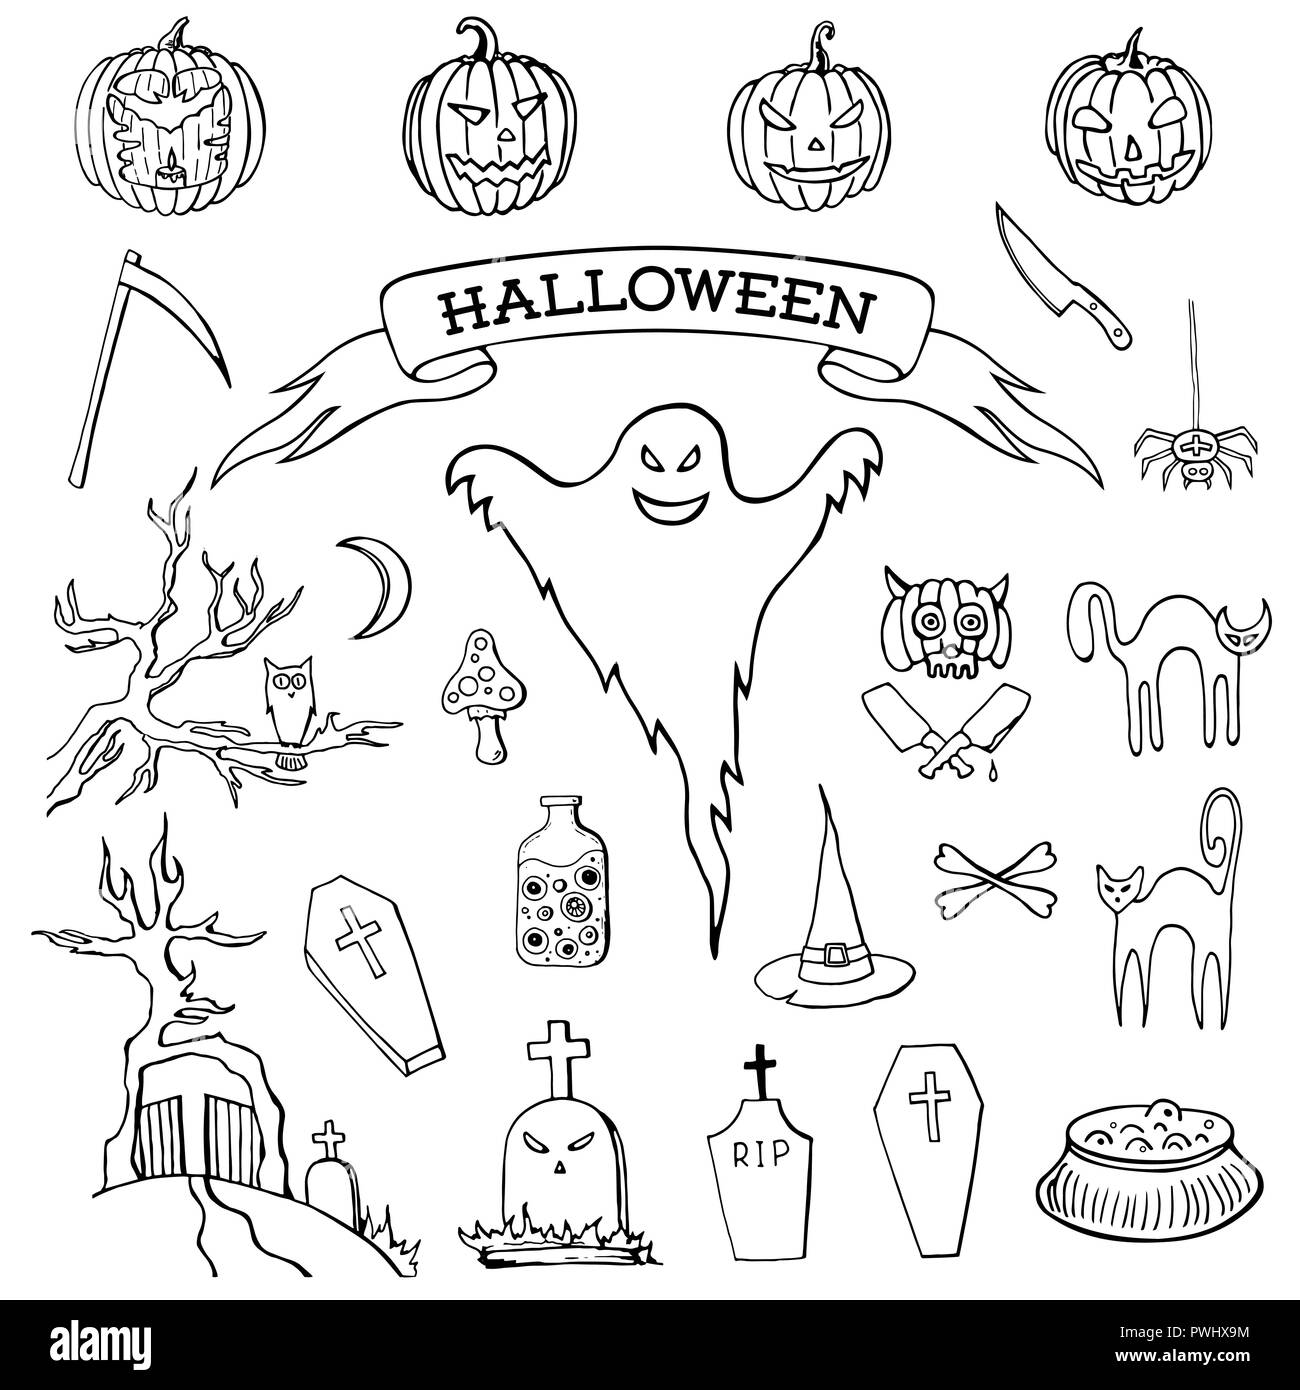 Set of hand drawn doodle cartoon elements of Halloween celebration. Halloween creatures. Black and white drawing. Isolated doodles on white background Stock Vector